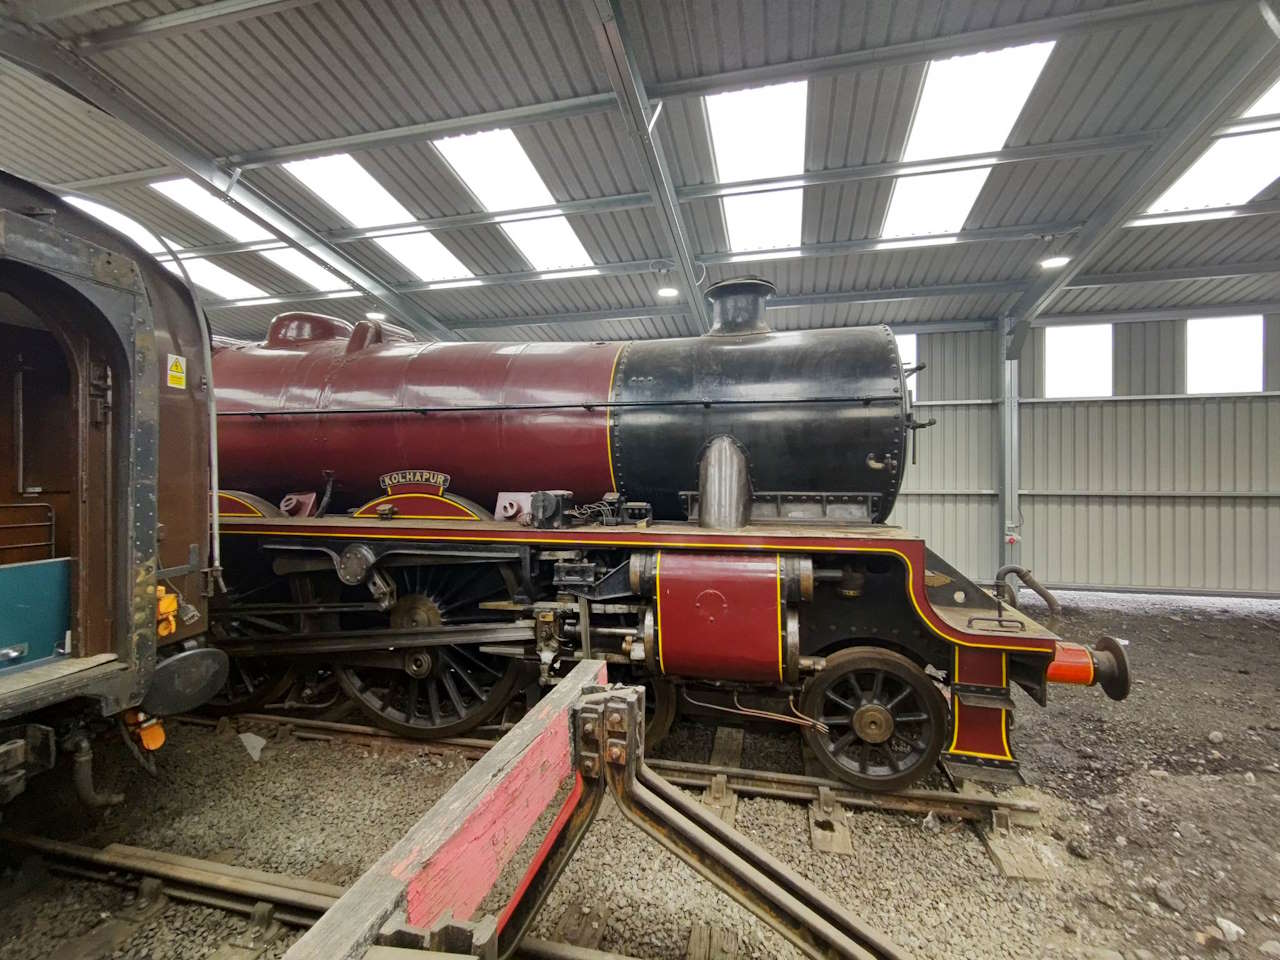 Jubilee loco in the carriage shed